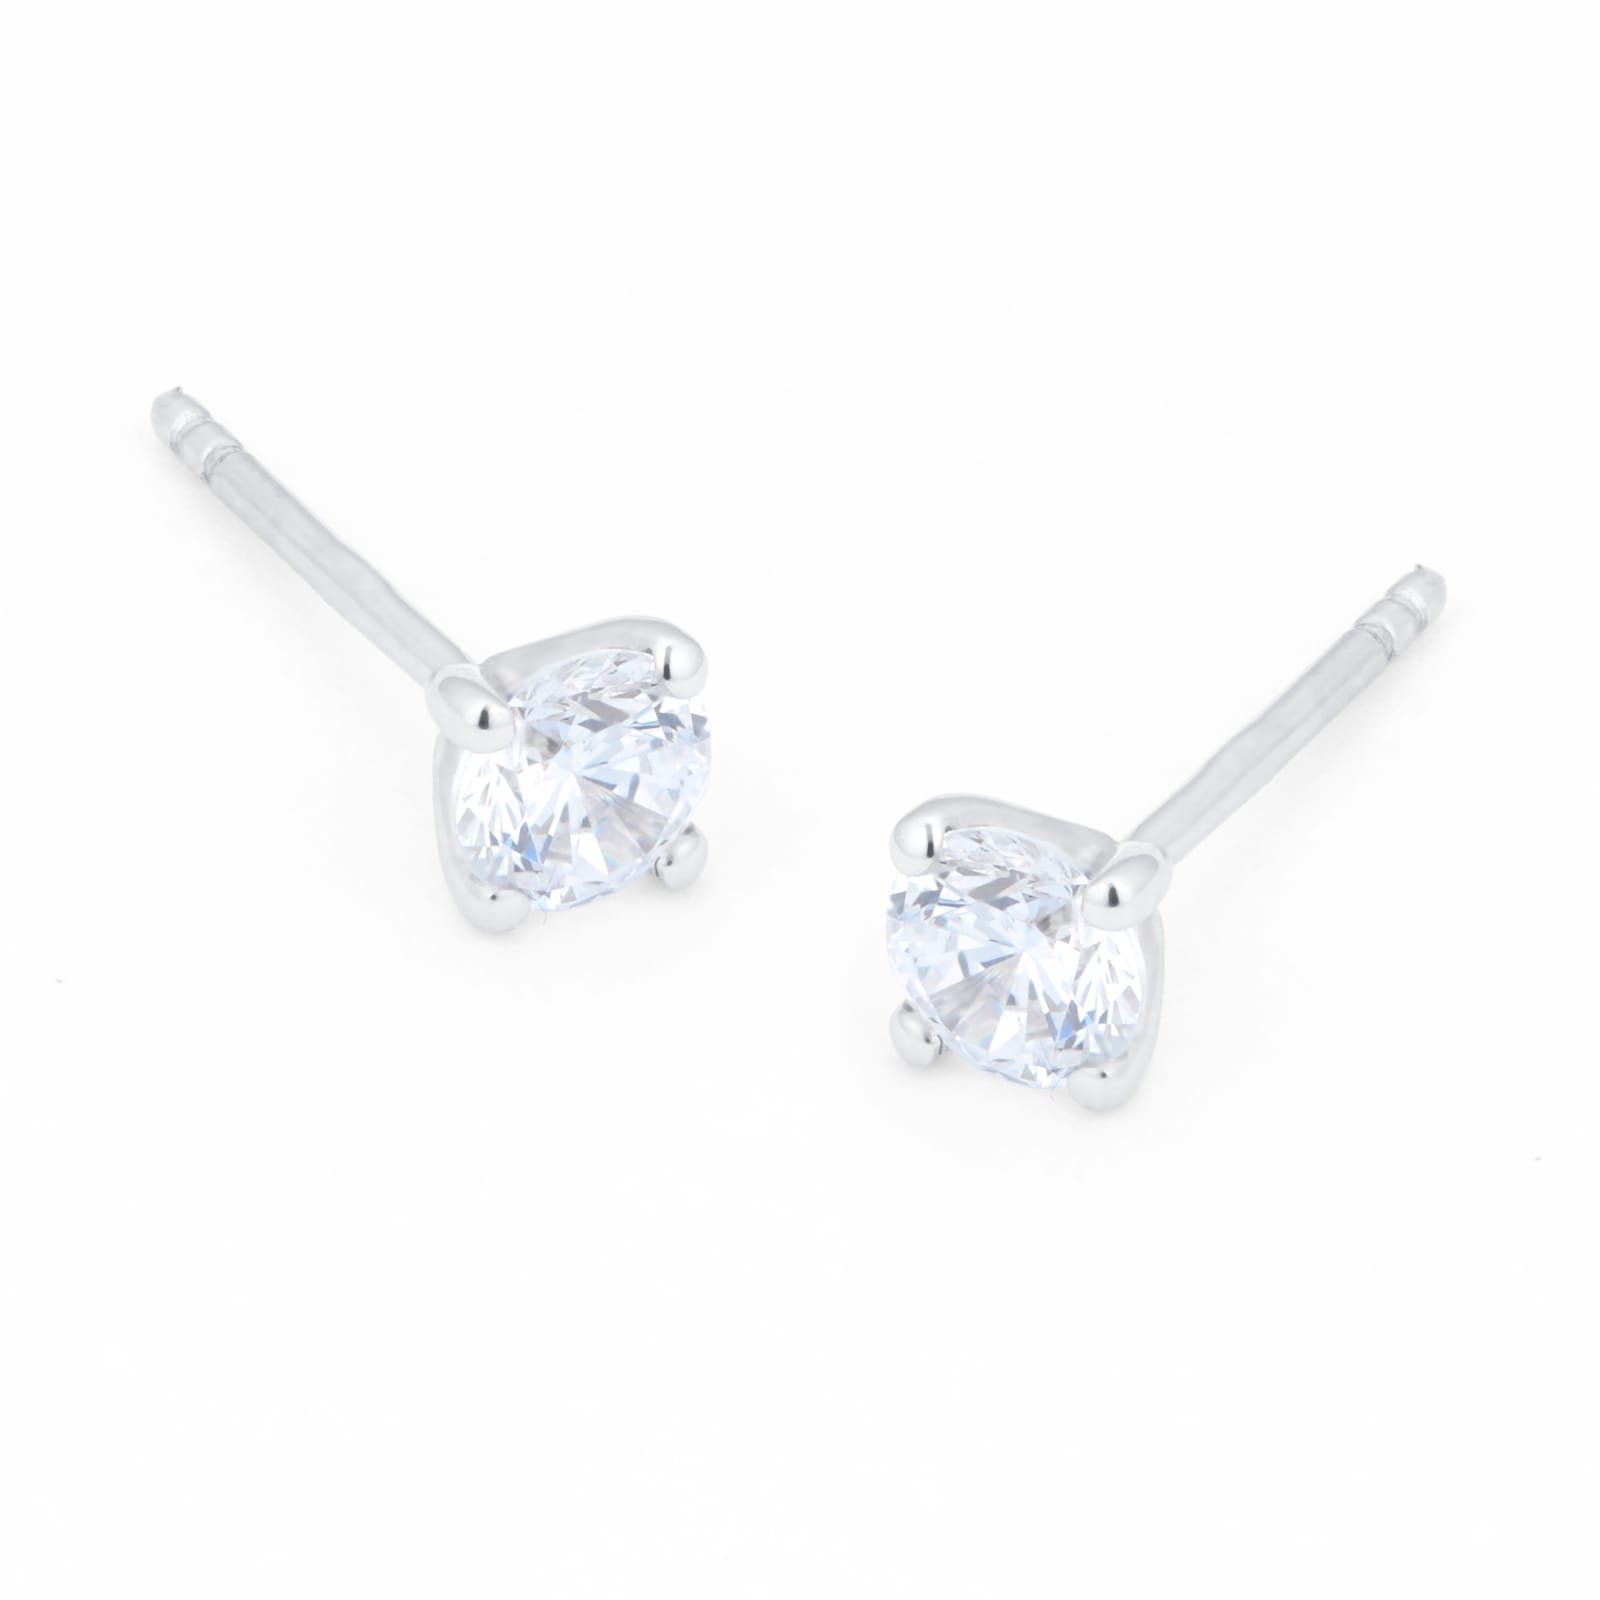 Goldsmiths 18ct White Gold 0.60cttw Solitaire Stud Earrings EX3137 ...